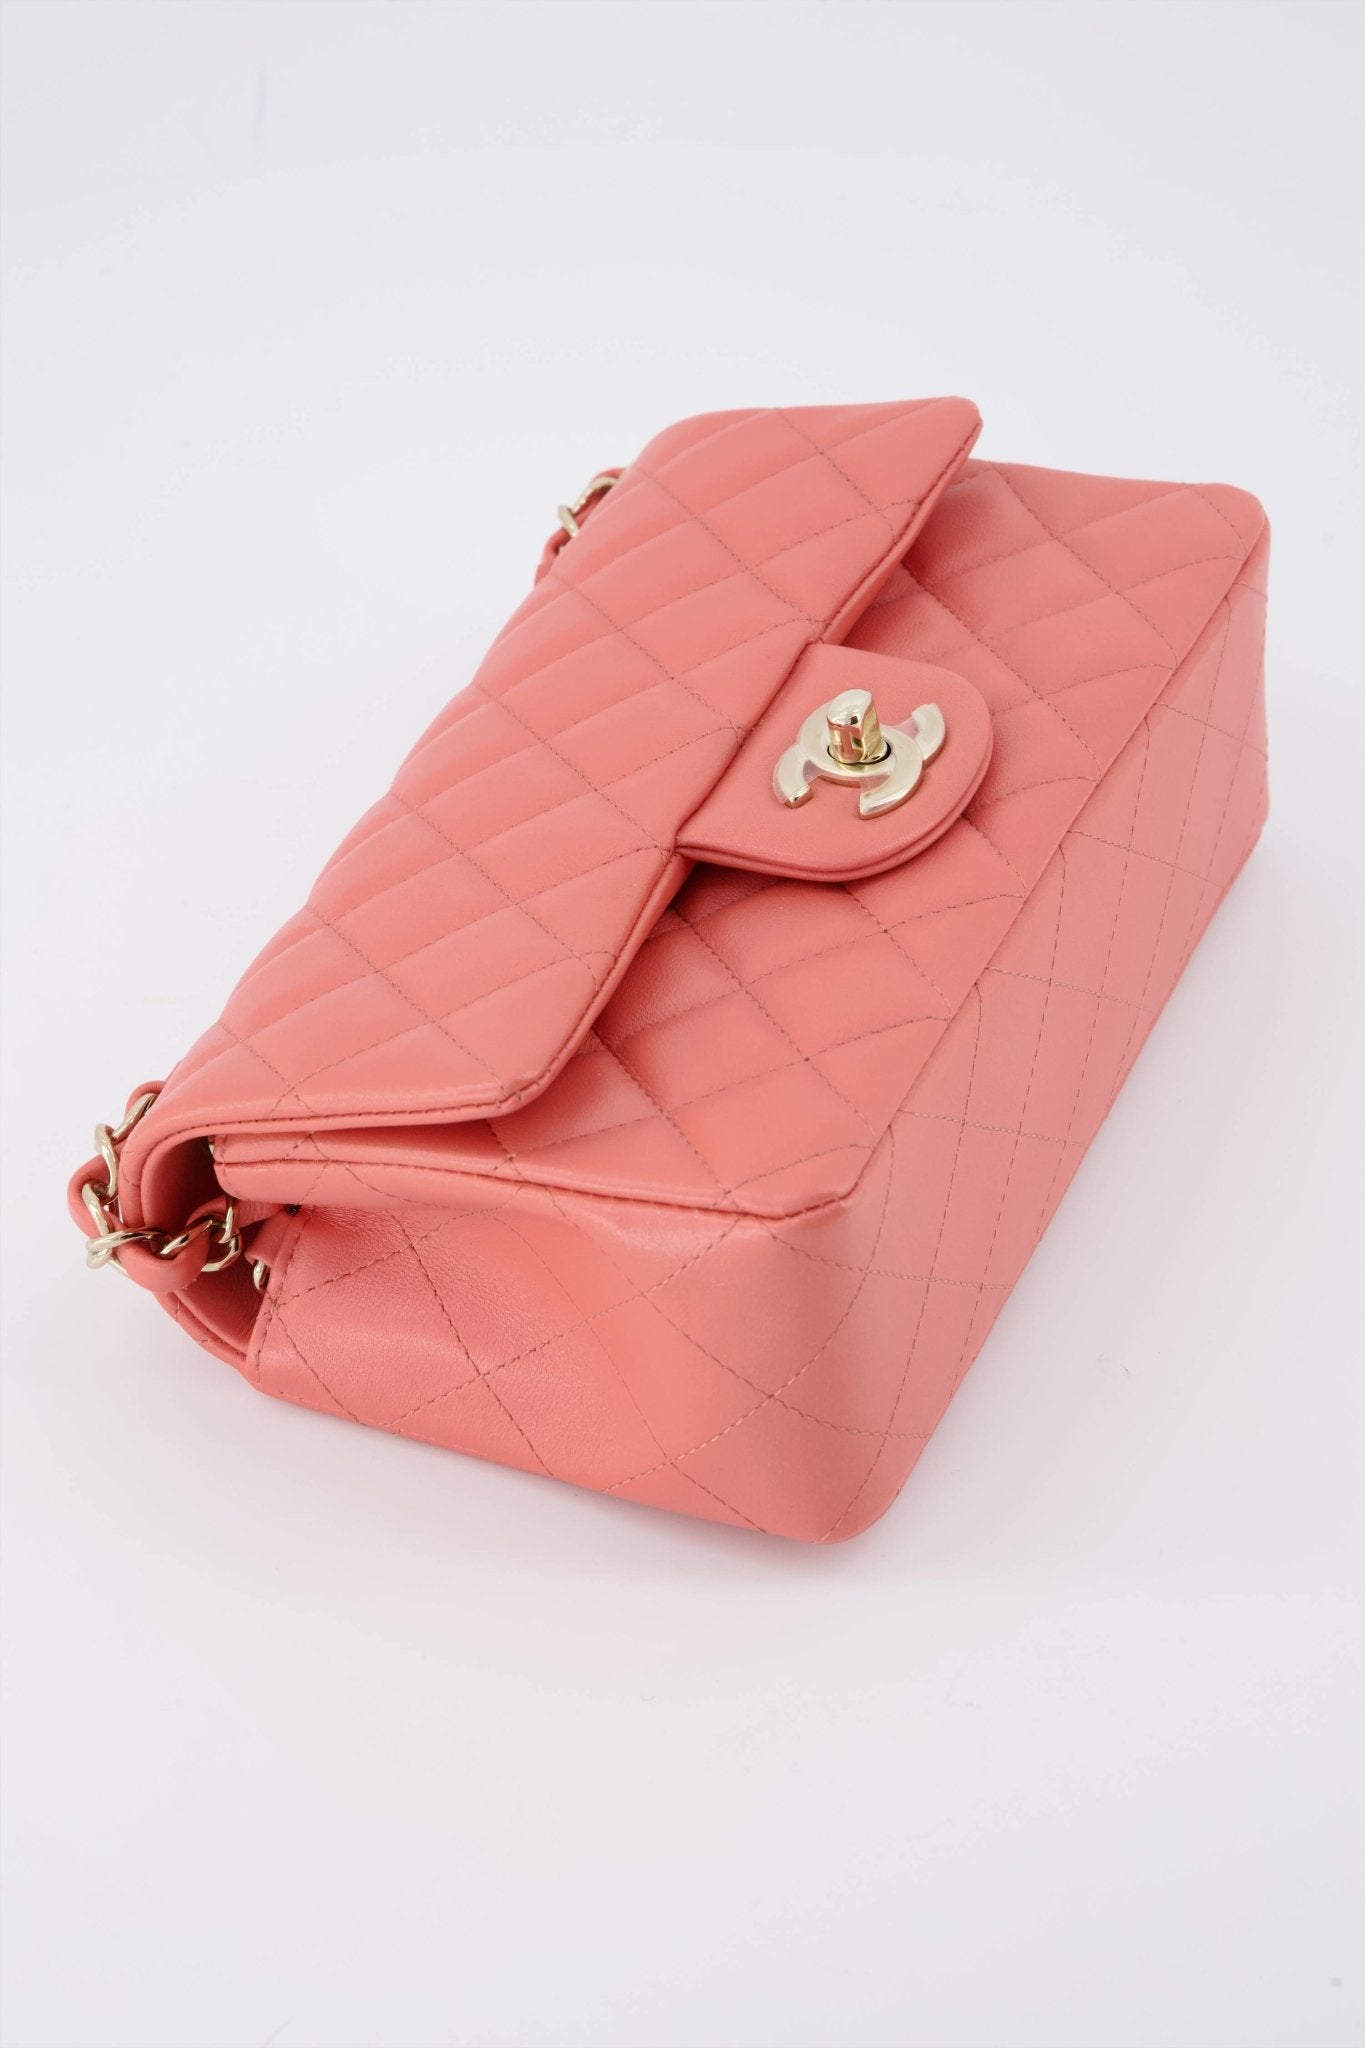 Chanel Mini Rectangular Flap Bag Pink Colour Lambskin with Champagne G